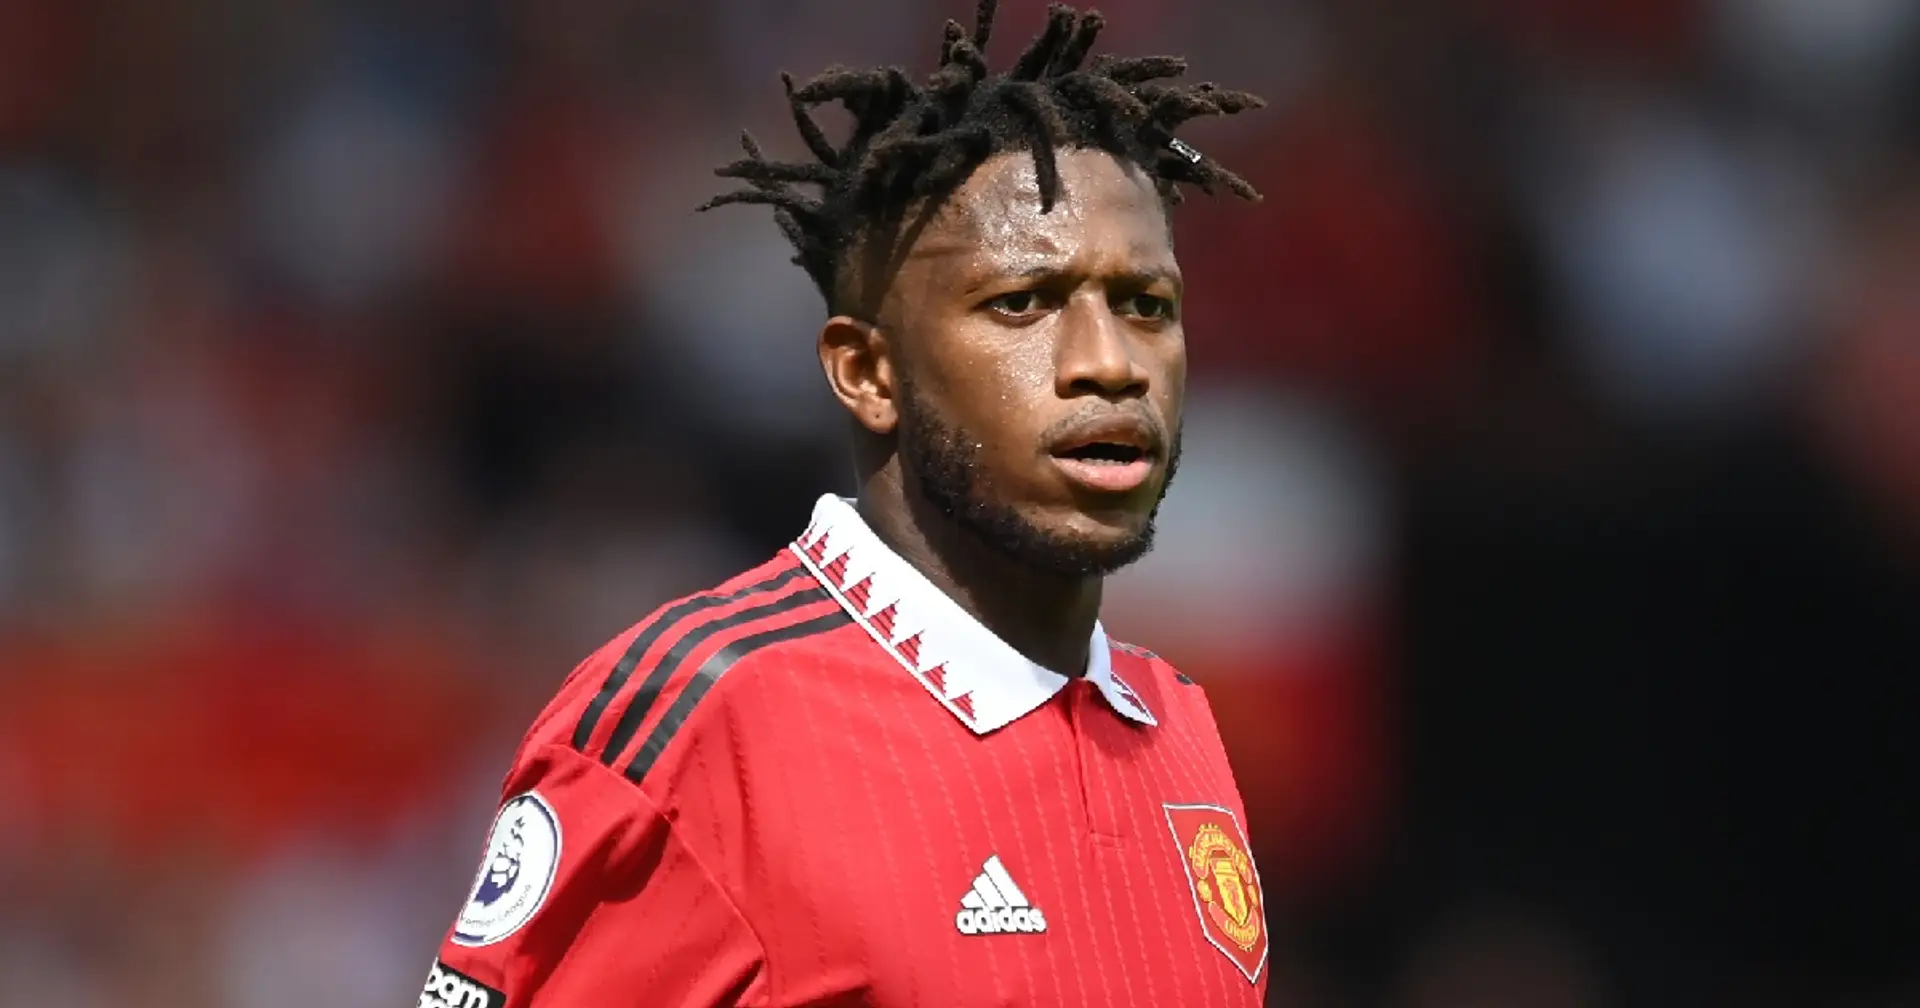 Fred could be released as free agent next summer (reliability: 5 stars)